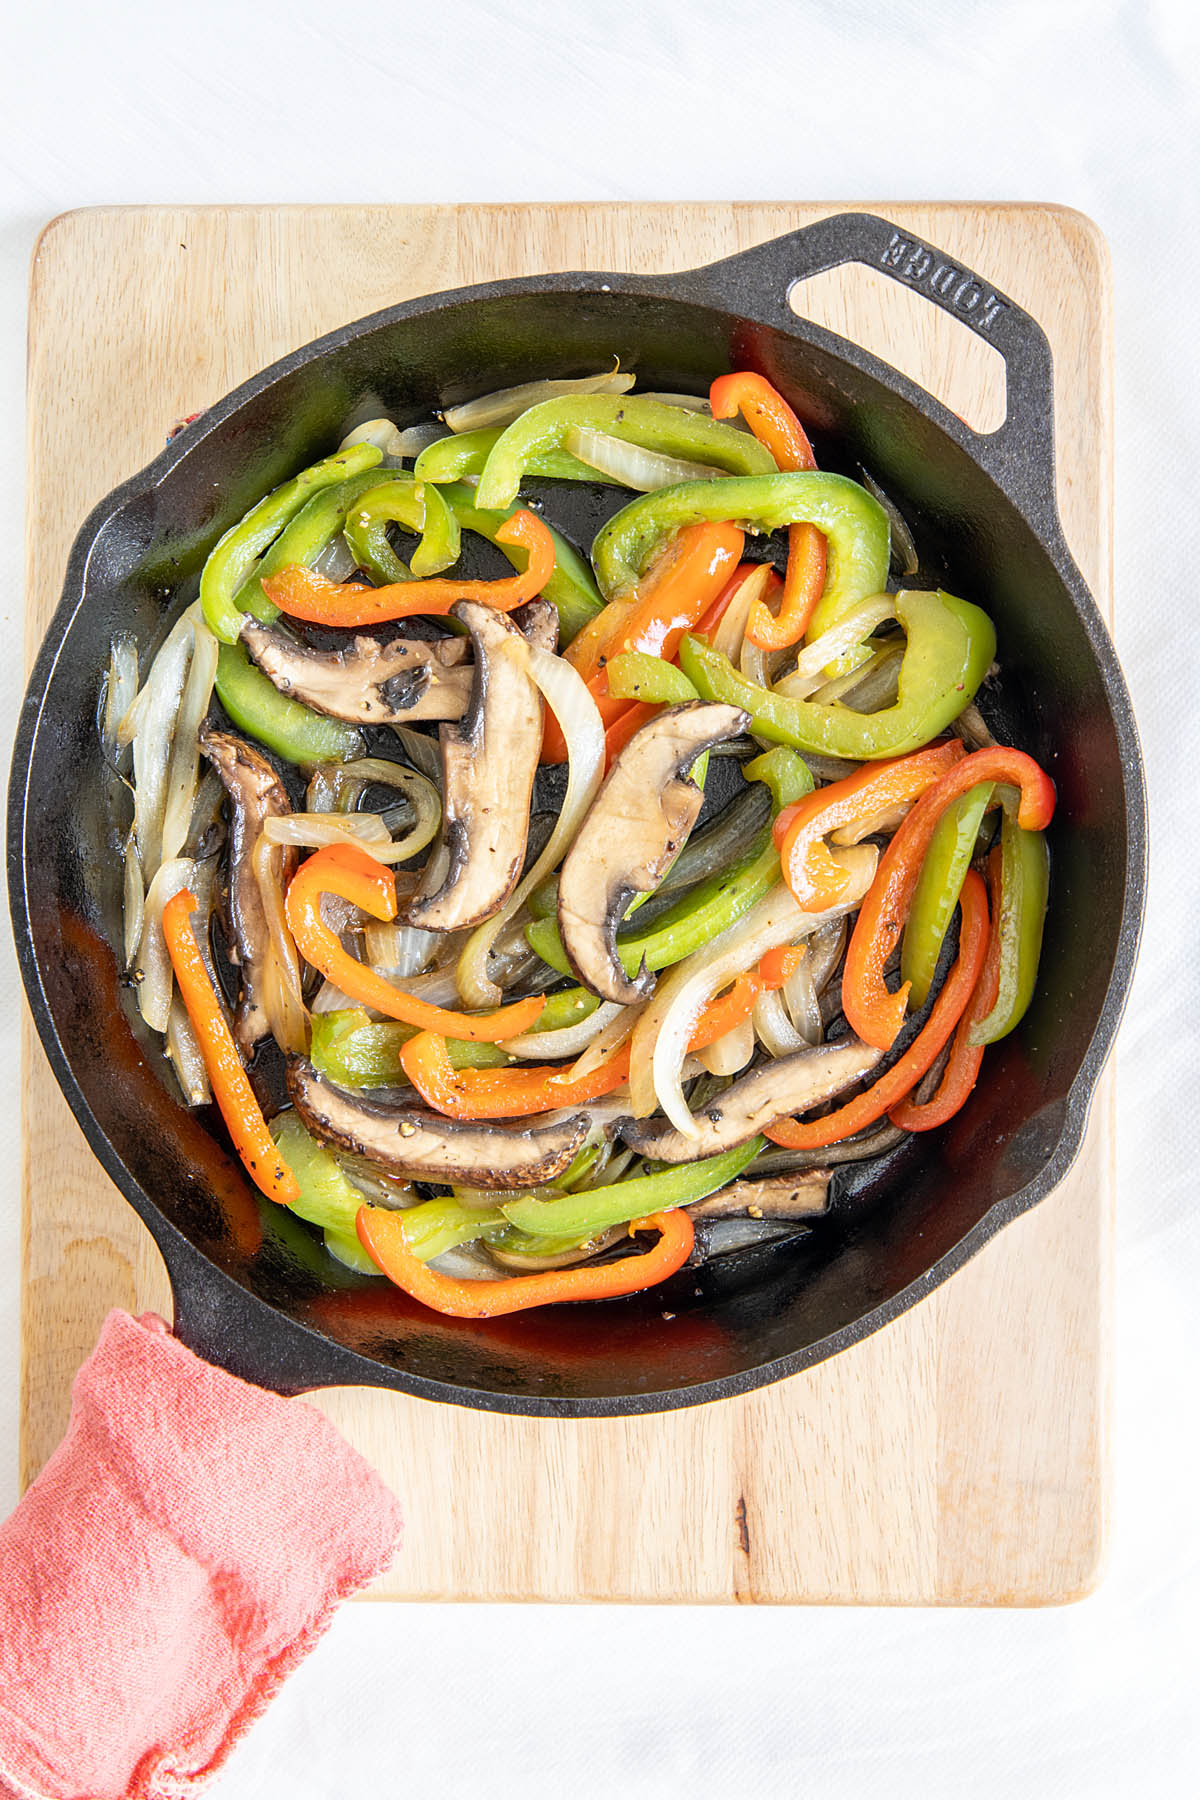 Onions, bell peppers, and portobello mushrooms in a cast iron skillet.